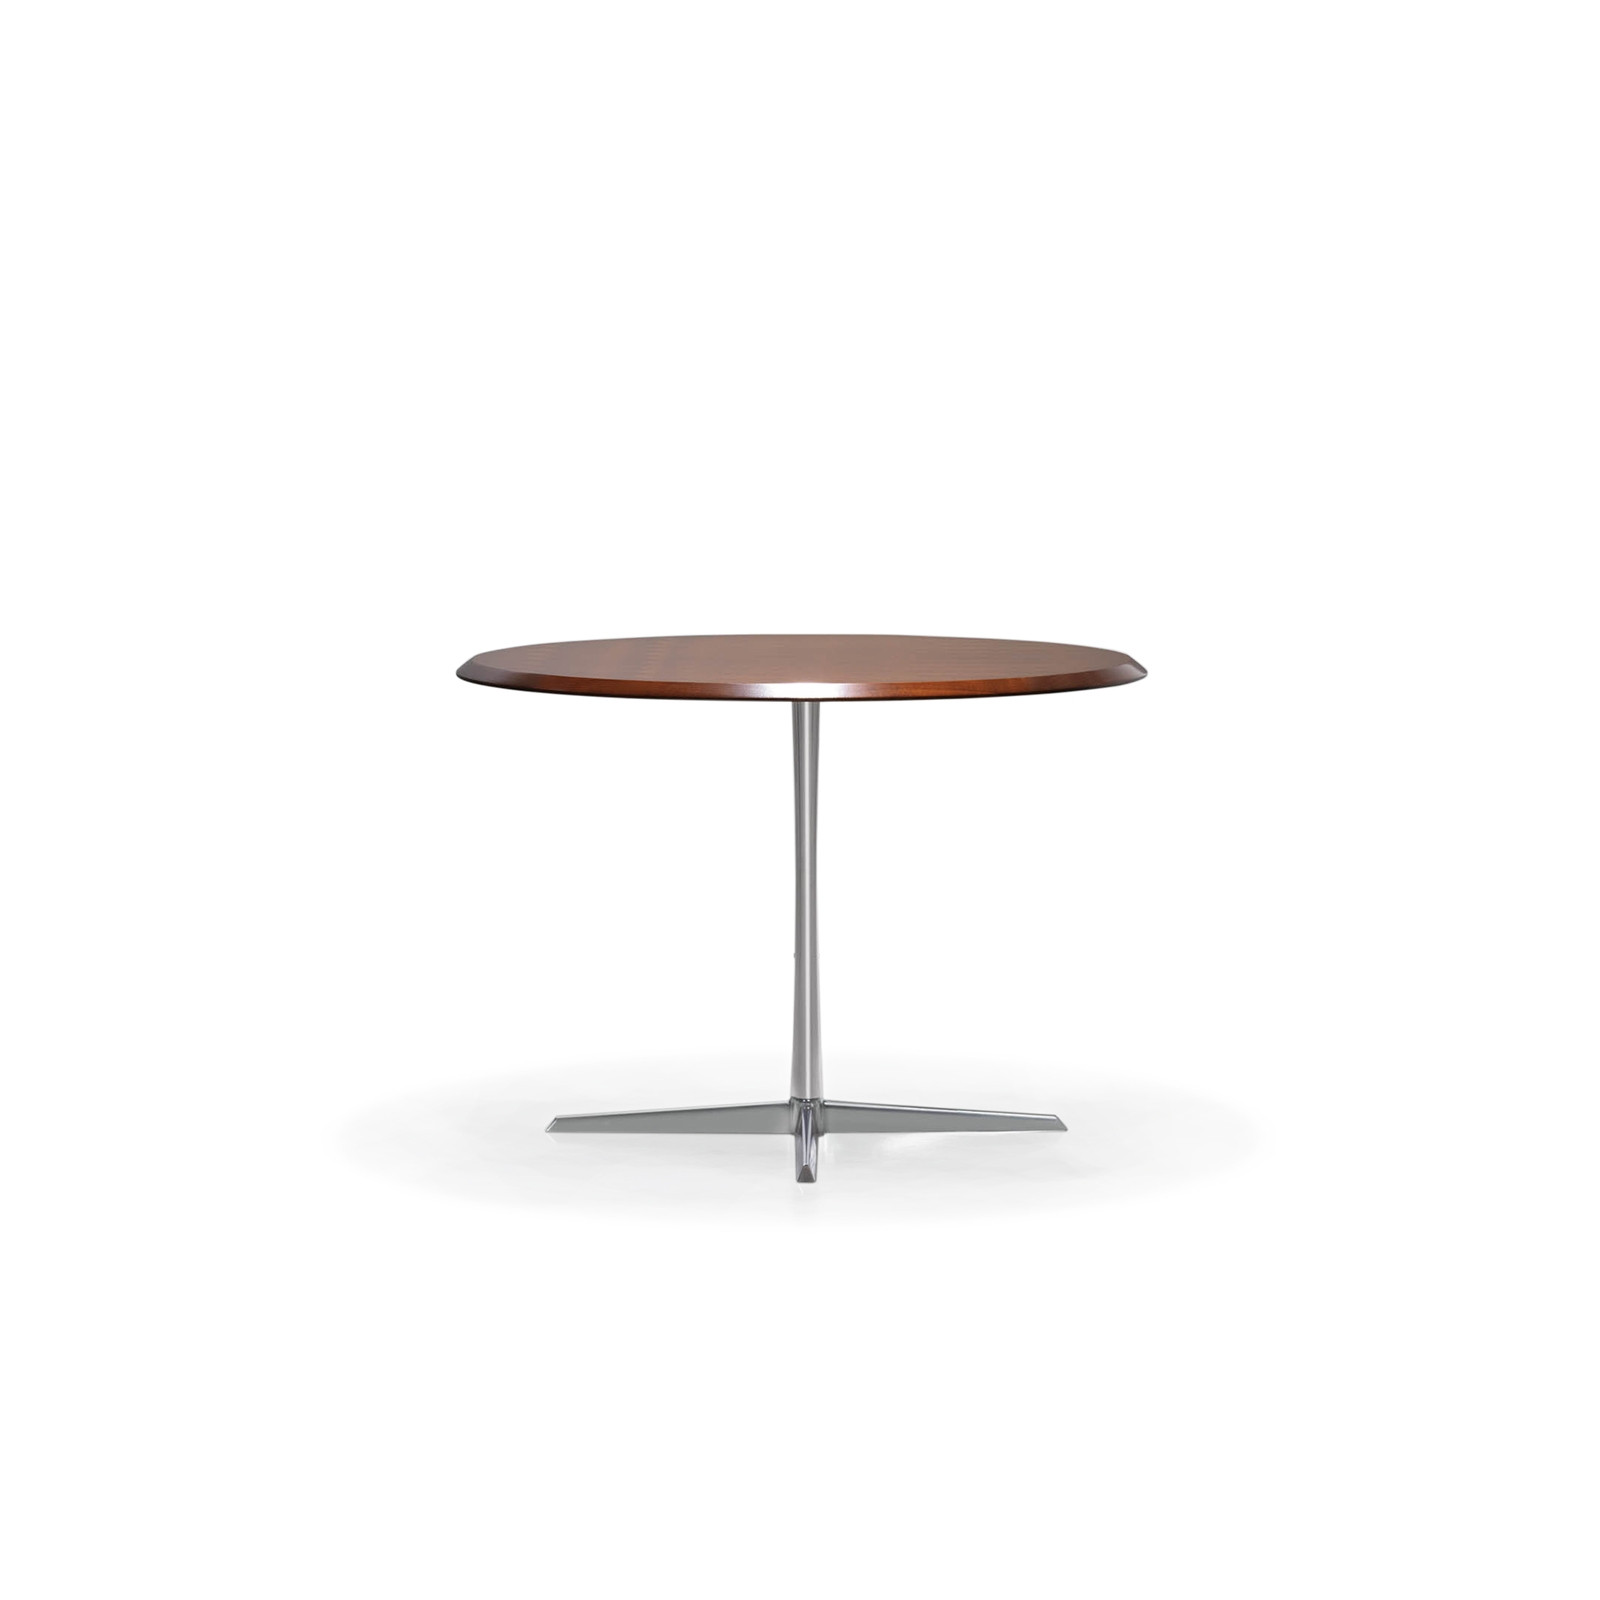 VUE DINING TABLE